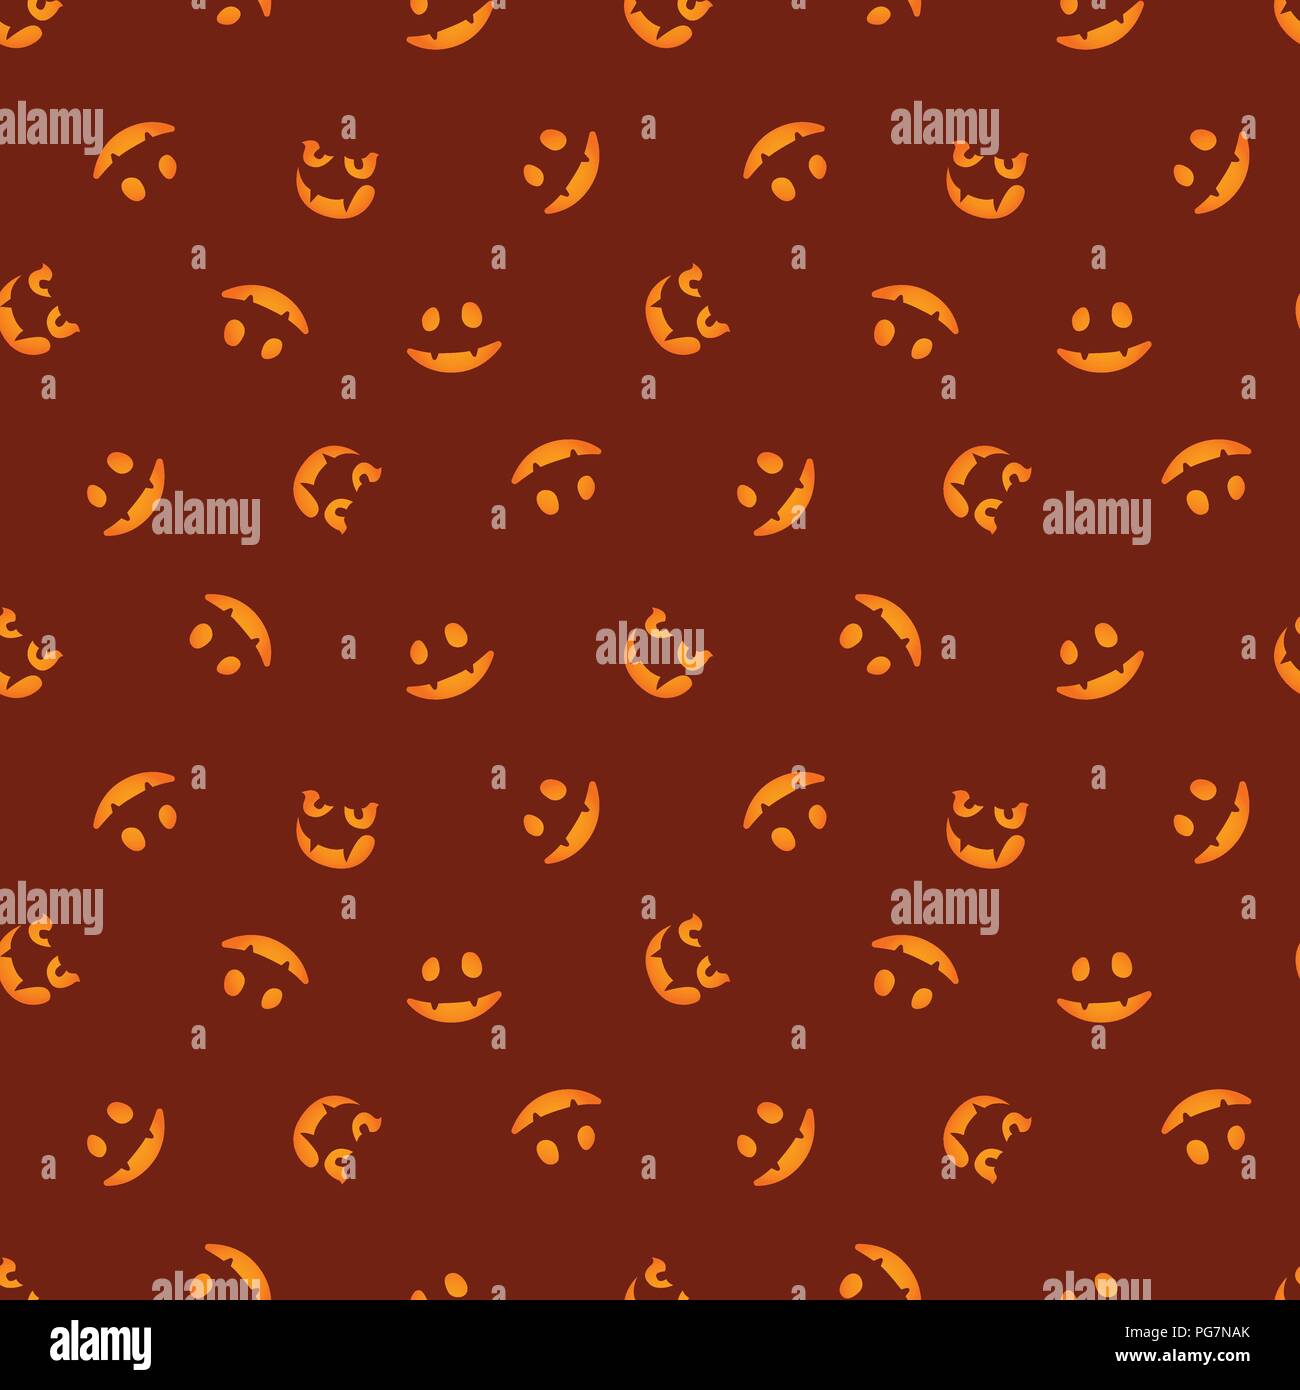 Glowing in the red pumpkin faces vector. Haloween seamless pattern. Stock Vector